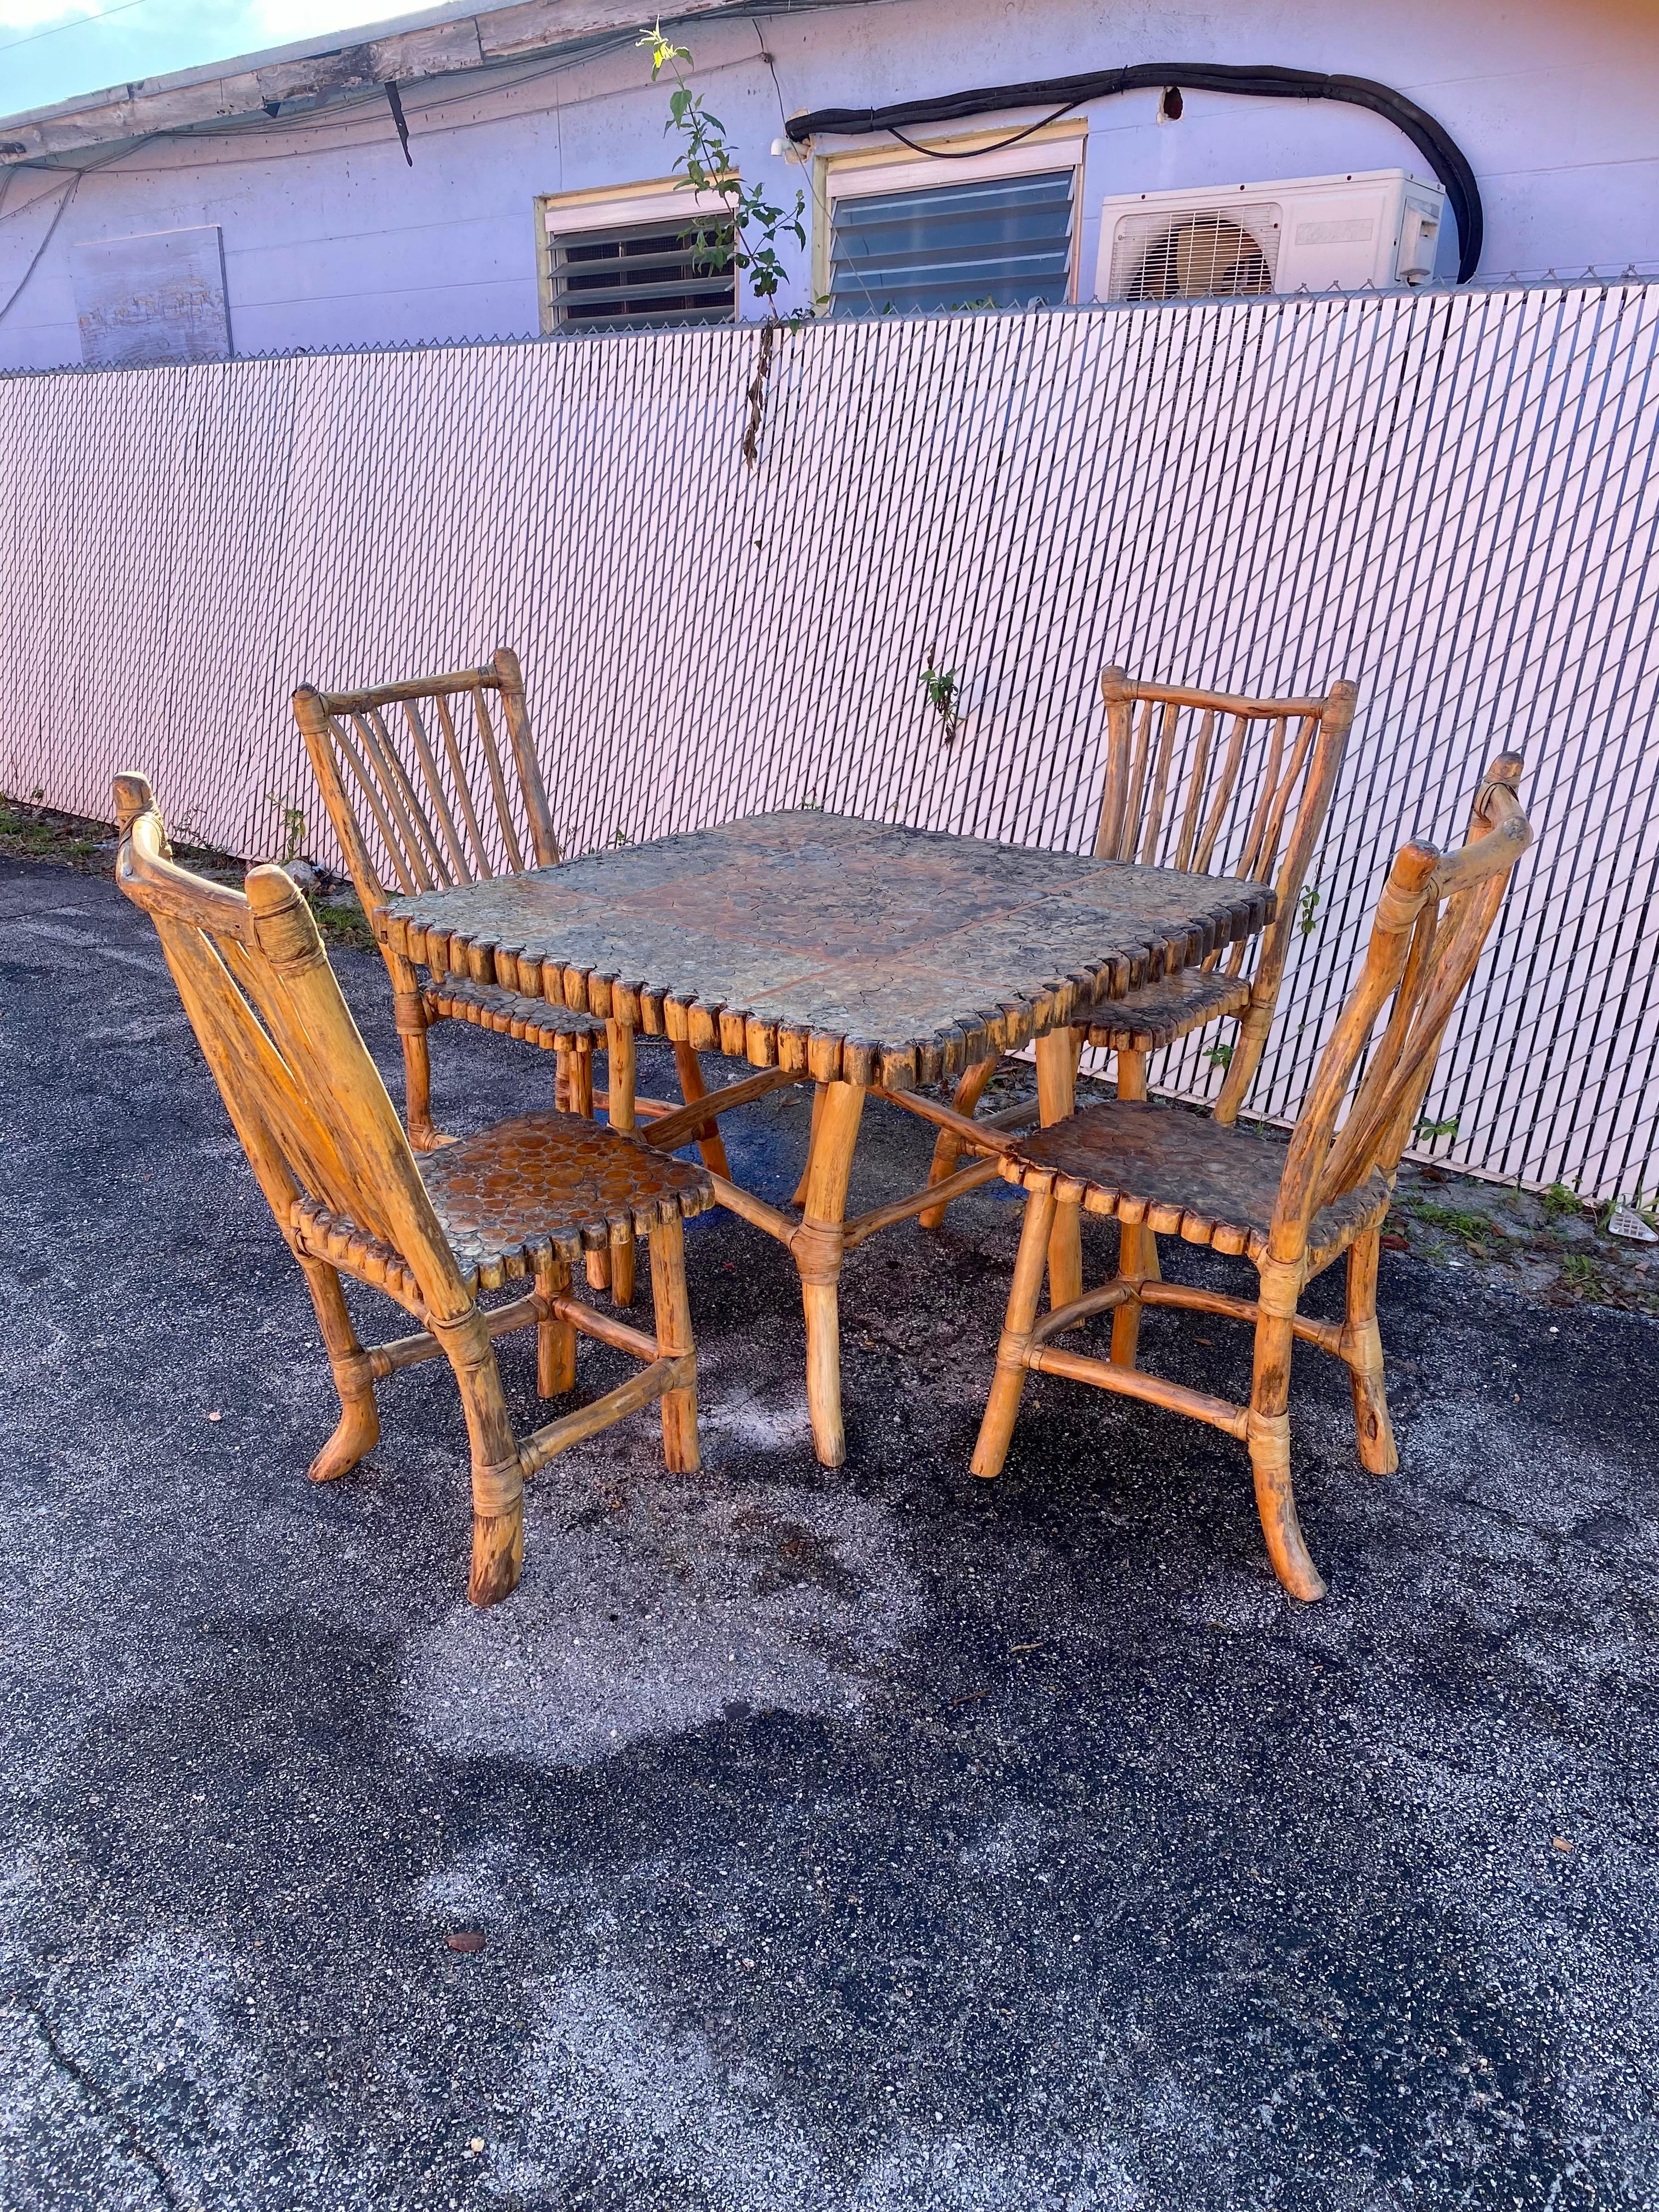 On offer on this occasion is one of the most stunning, rare, handmade and crafted rattan dining set you could hope to find. Outstanding design is exhibited throughout. The beautiful sculptural set is statement piece which is also extremely